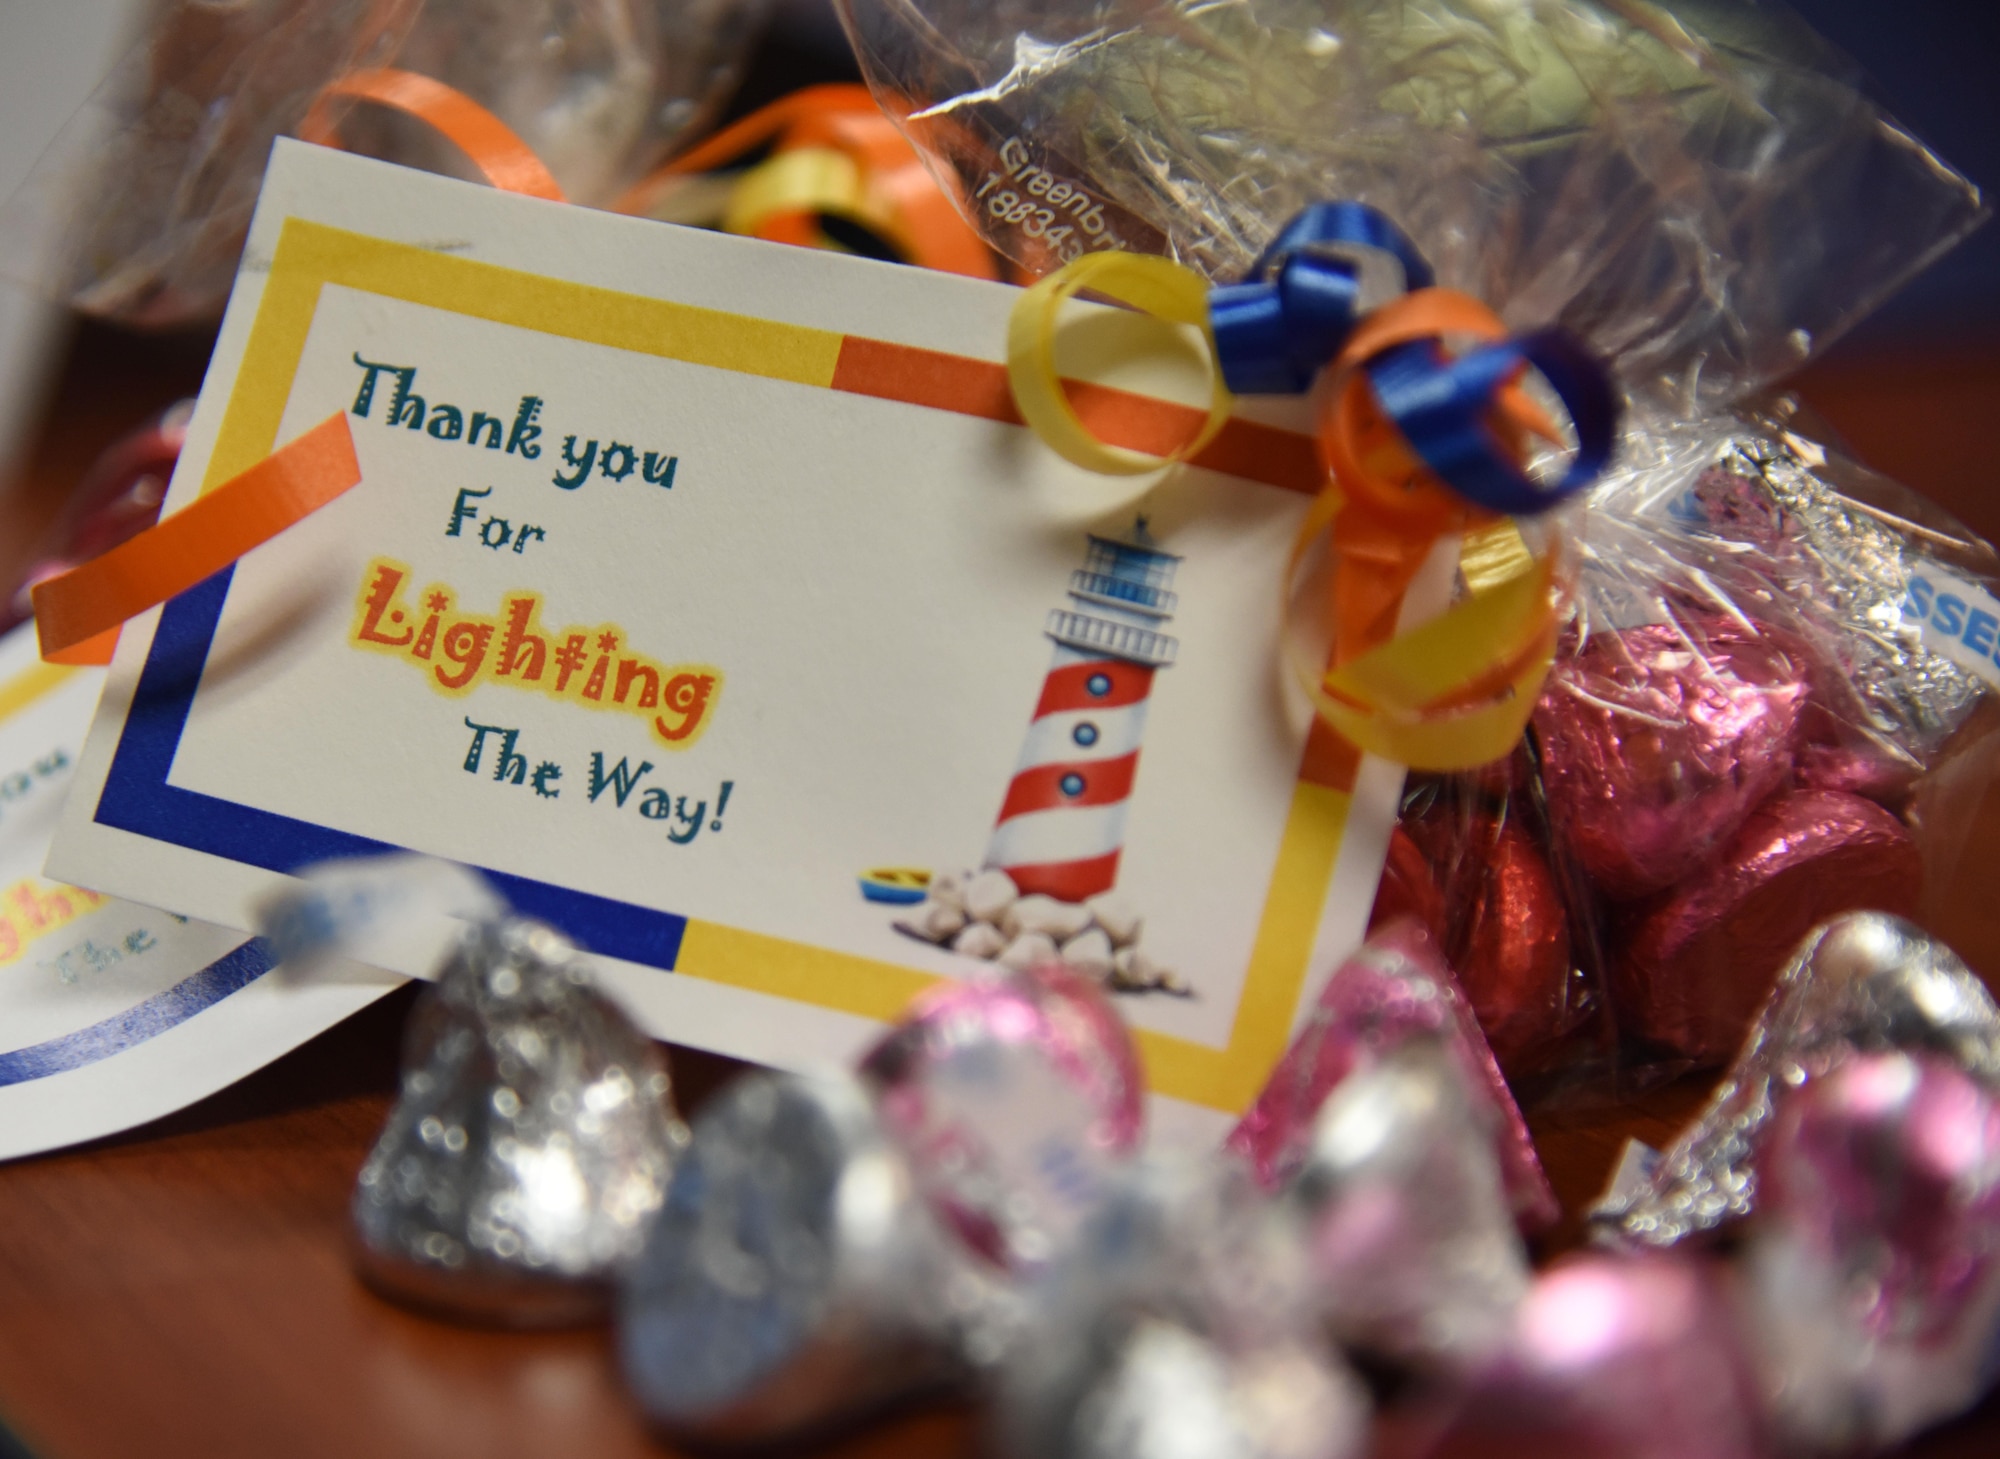 A tag and candy sit on display during the Annual Volunteer Recognition Ceremony in the Sablich Center April 27, 2017, on Keesler Air Force Base, Miss. The event recognized Keesler personnel, family member and retiree volunteers for their volunteer service in 2016. (U.S. Air Force photo by Kemberly Groue)